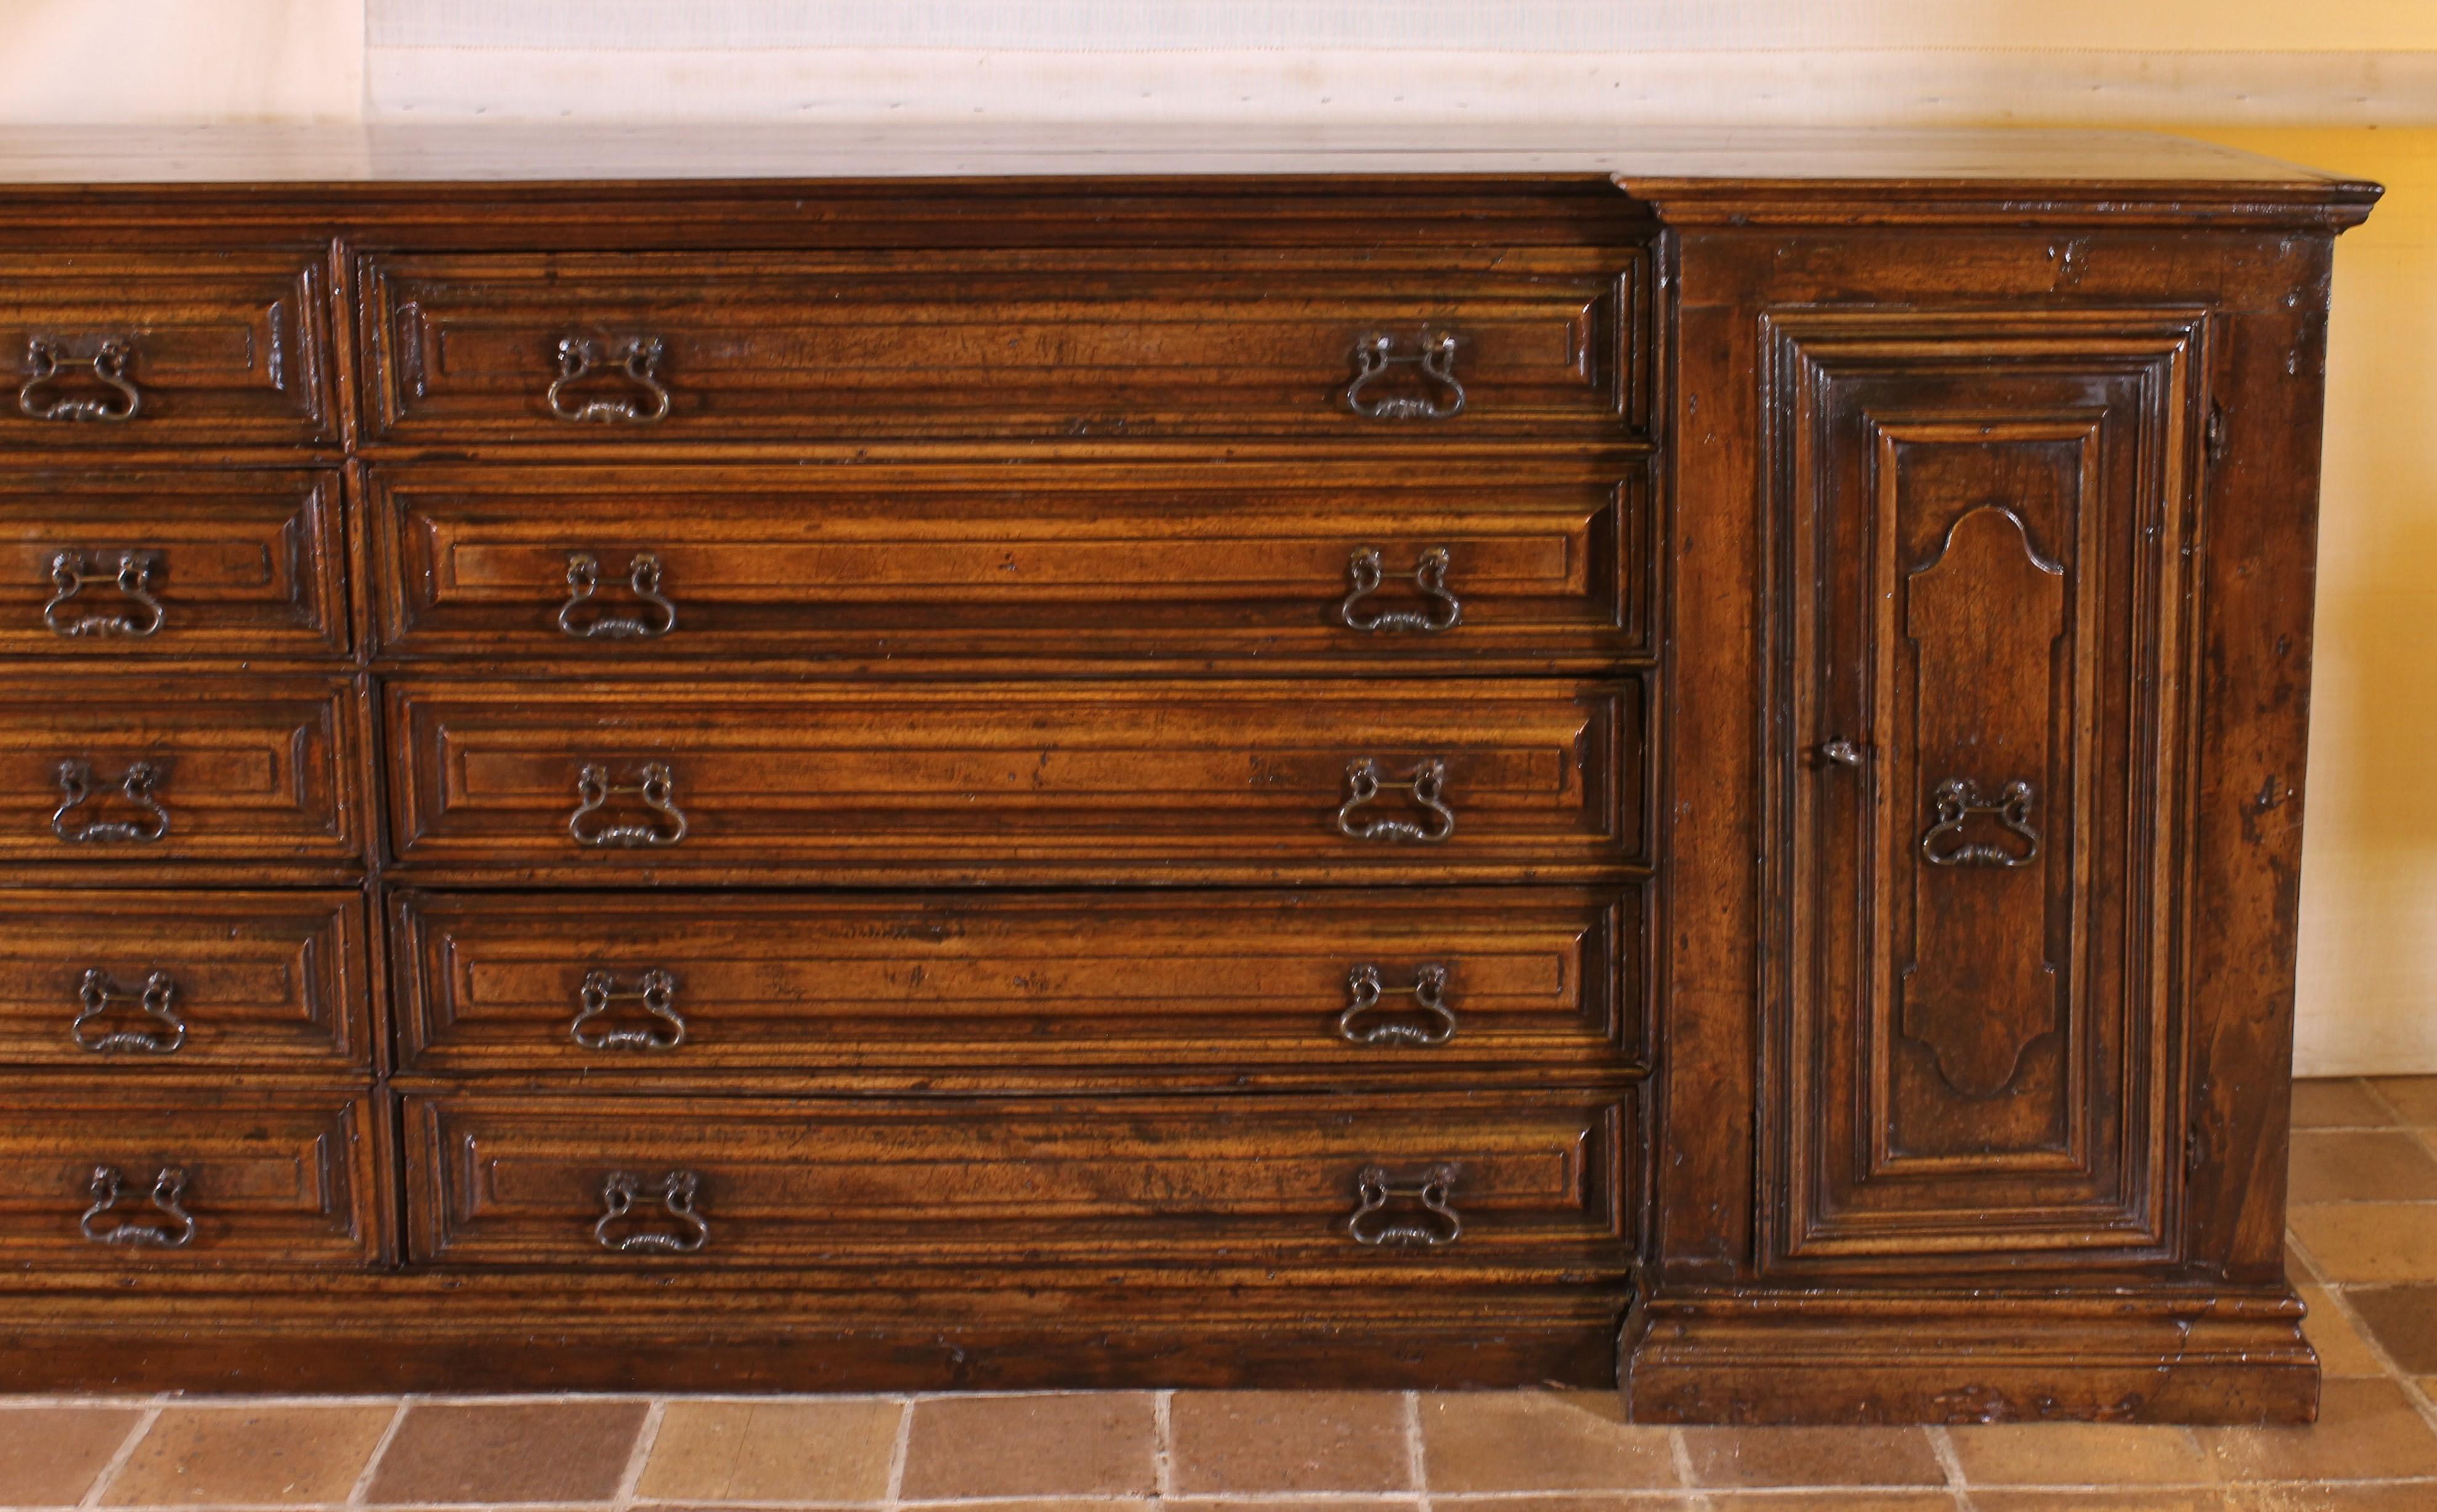 Italian Renaissance sacristy cabinet / buffet in walnut early 17th century probably from Venice
Superb and rare sacristy credenza composed of 10 drawers and two doors. T
he large drawers were used to store vestments from the priests
exceptional